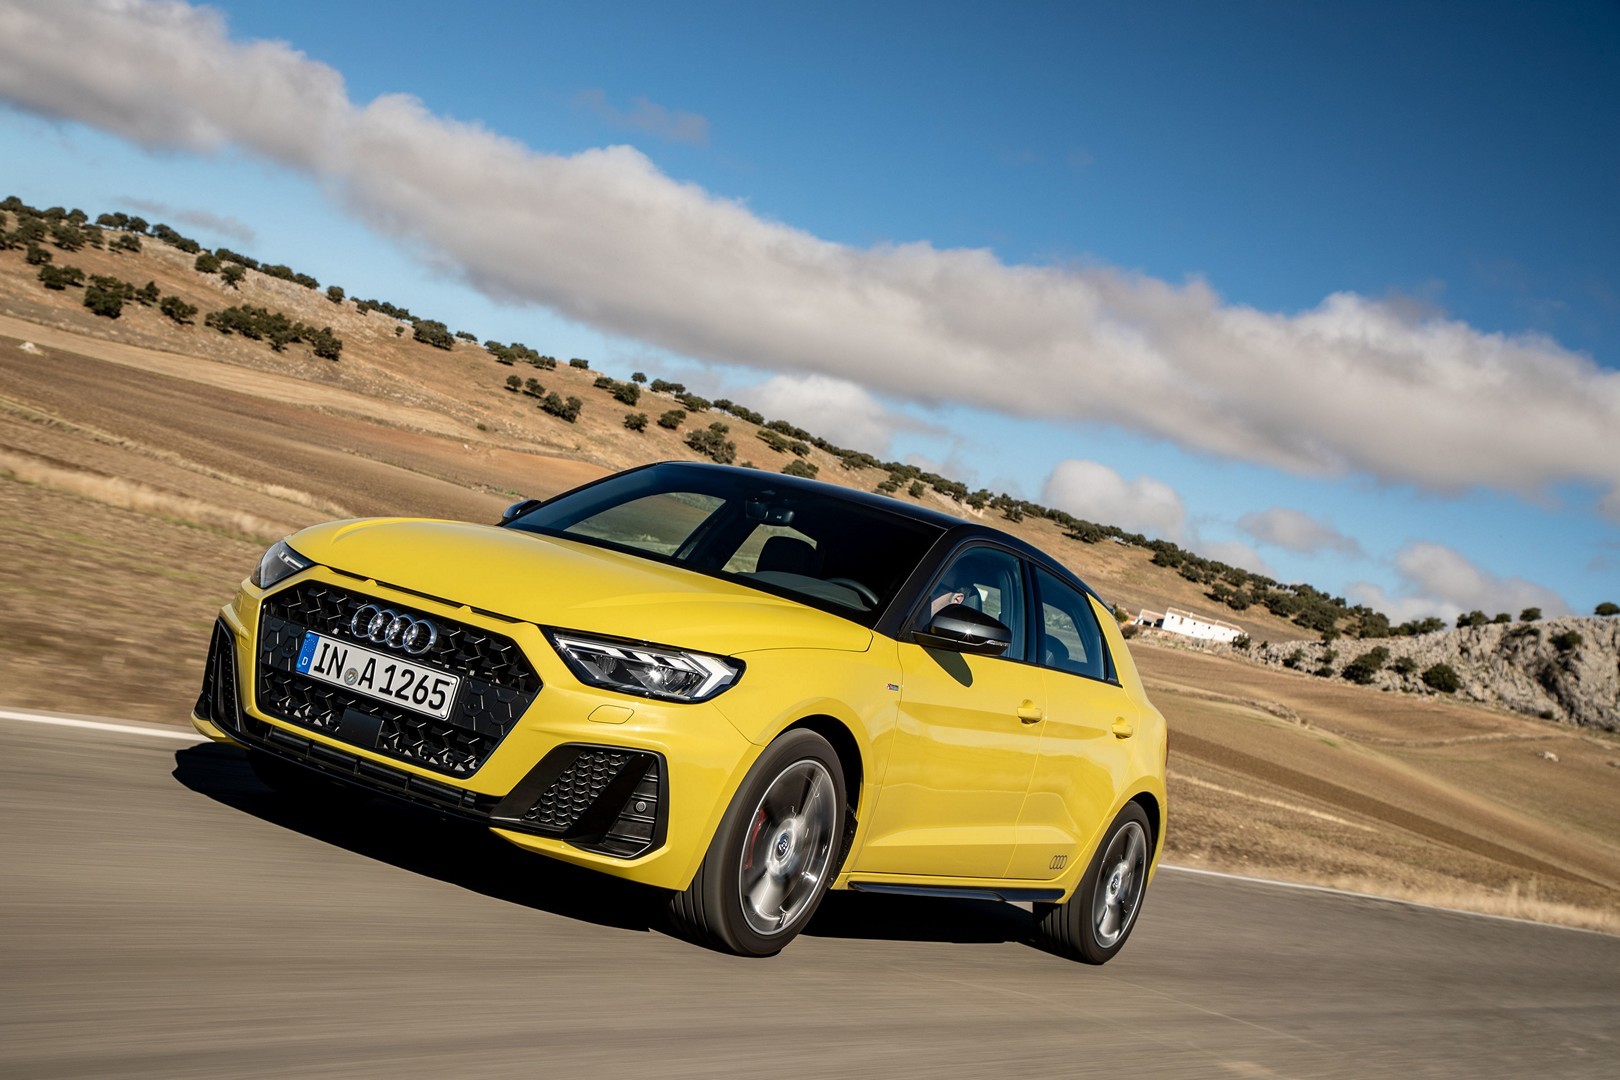 New Audi A1 Priced In The UK From 18,540 GBP - autoevolution